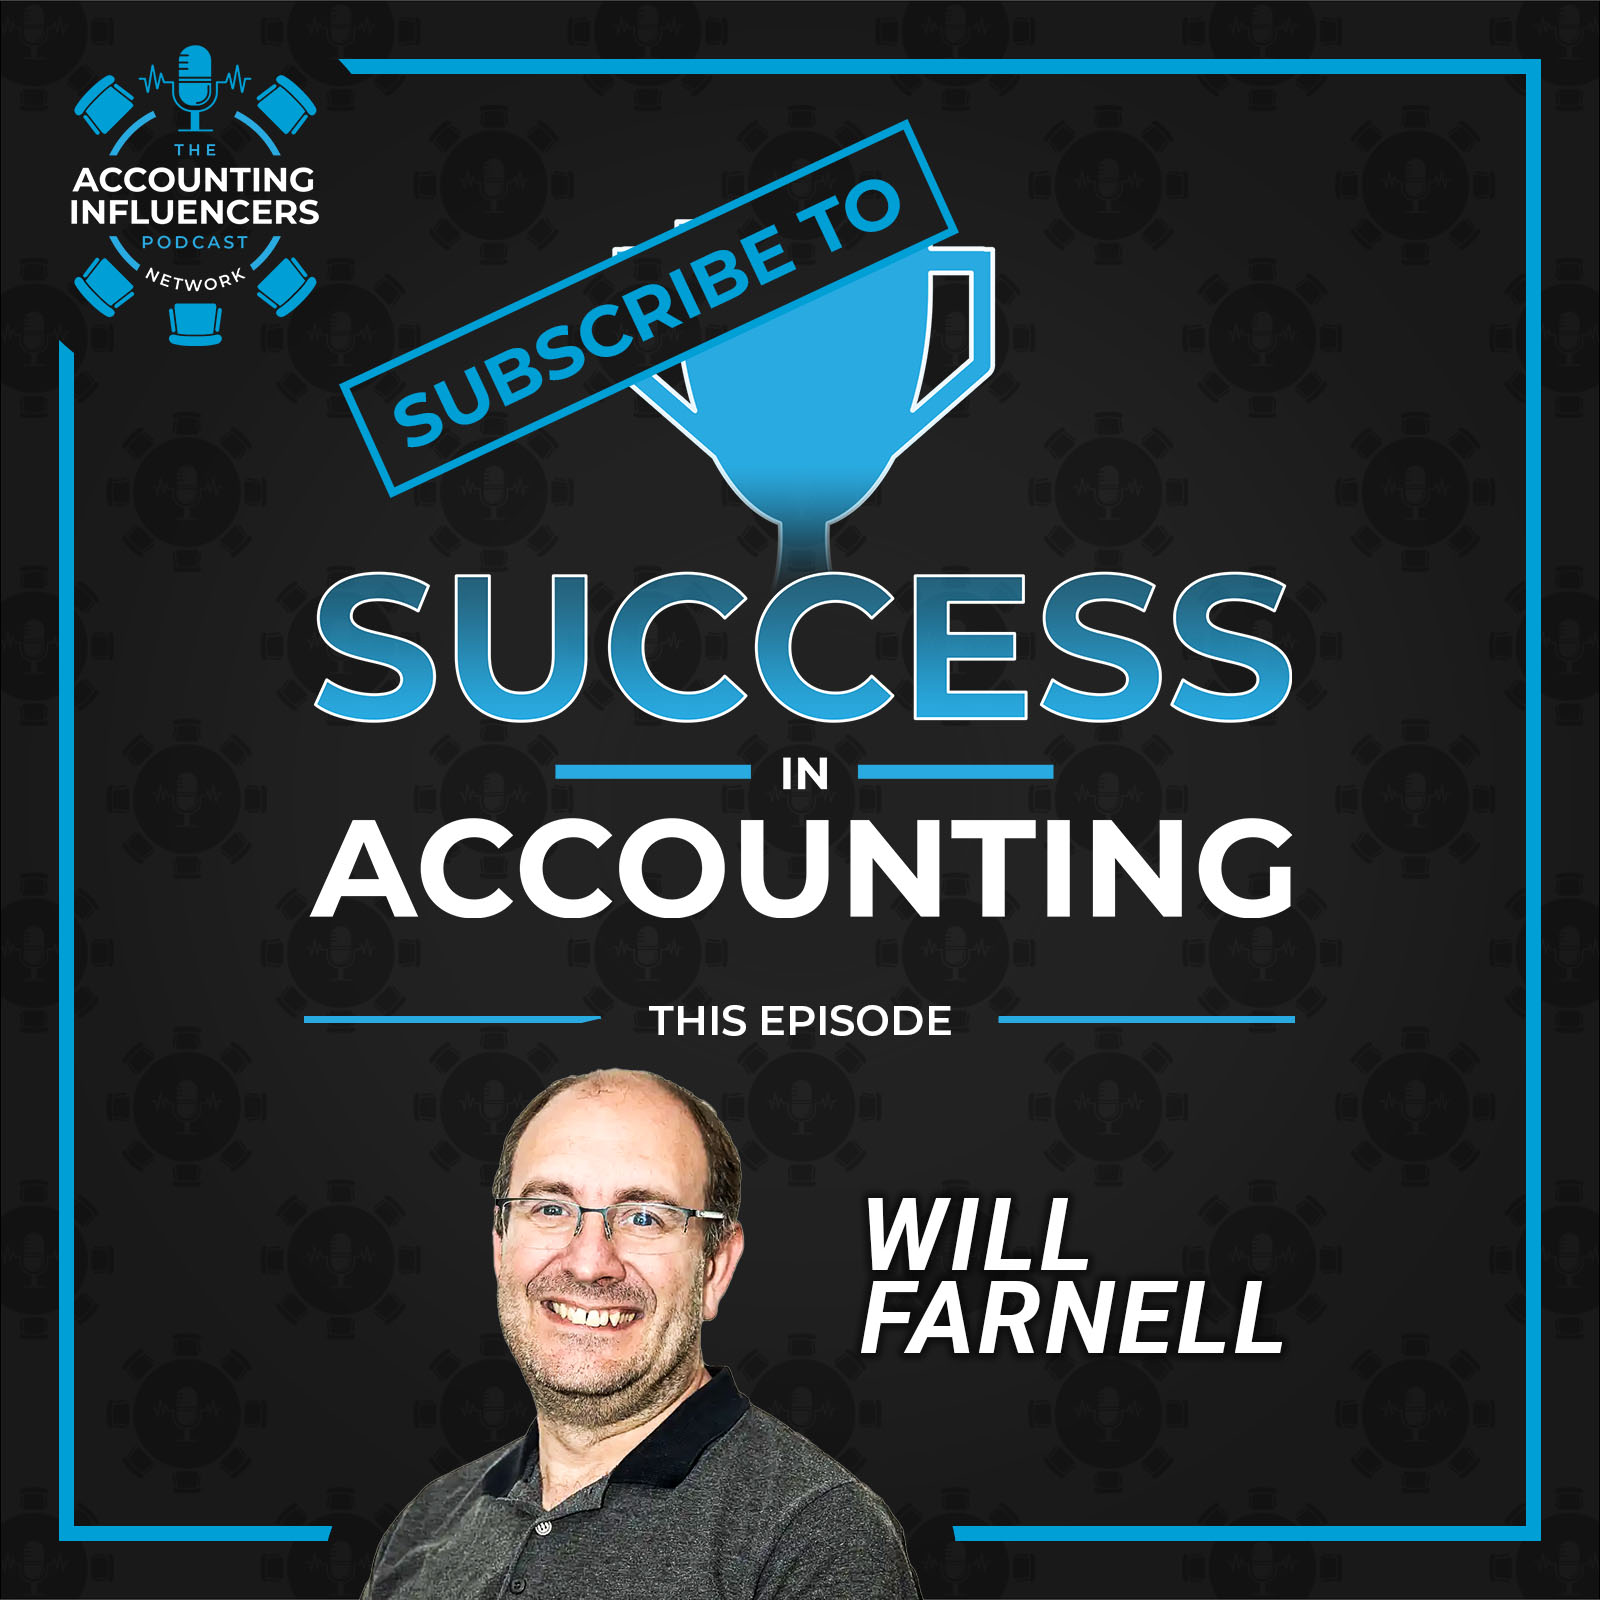 Artwork for podcast Insights in Accounting